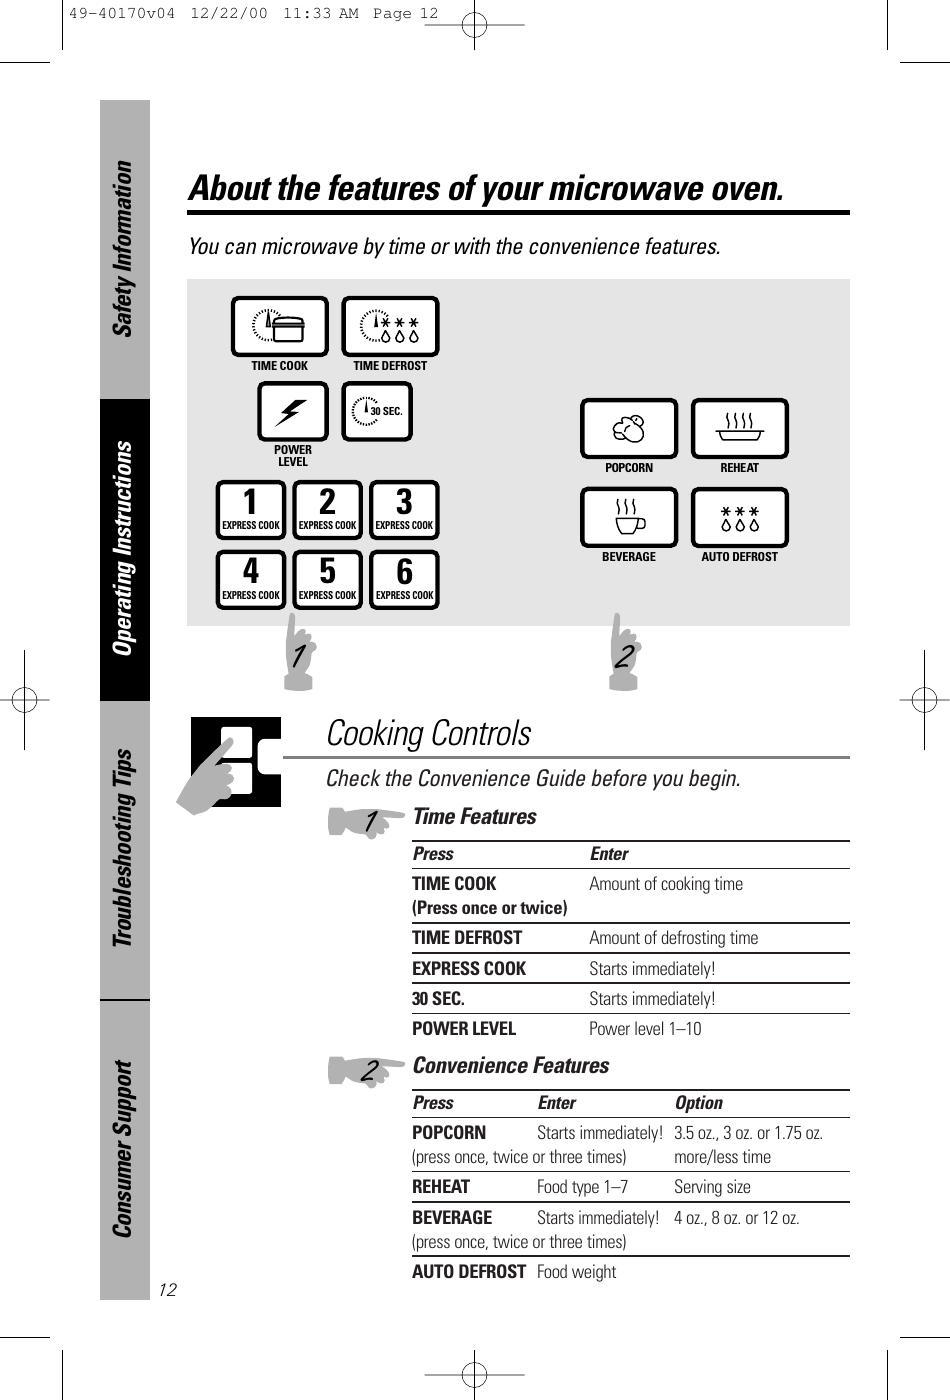 Check the Convenience Guide before you begin.Time FeaturesPress EnterTIME COOK Amount of cooking time(Press once or twice)TIME DEFROST Amount of defrosting timeEXPRESS COOK Starts immediately!30 SEC. Starts immediately!POWER LEVEL Power level 1–10Convenience FeaturesPress Enter OptionPOPCORN Starts immediately! 3.5 oz., 3 oz. or 1.75 oz.(press once, twice or three times) more/less timeREHEAT Food type 1–7 Serving sizeBEVERAGEStarts immediately!4 oz., 8 oz. or 12 oz.(press once, twice or three times)AUTO DEFROST Food weightAbout the features of your microwave oven.You can microwave by time or with the convenience features. TIME COOK TIME DEFROSTPOWERLEVEL30 SEC.POPCORN REHEATBEVERAGE AUTO DEFROST1EXPRESS COOK3EXPRESS COOK2EXPRESS COOK5EXPRESS COOK6EXPRESS COOK4EXPRESS COOKCooking Controls121 2Safety InformationOperating InstructionsTroubleshooting TipsConsumer Support1249-40170v04  12/22/00  11:33 AM  Page 12